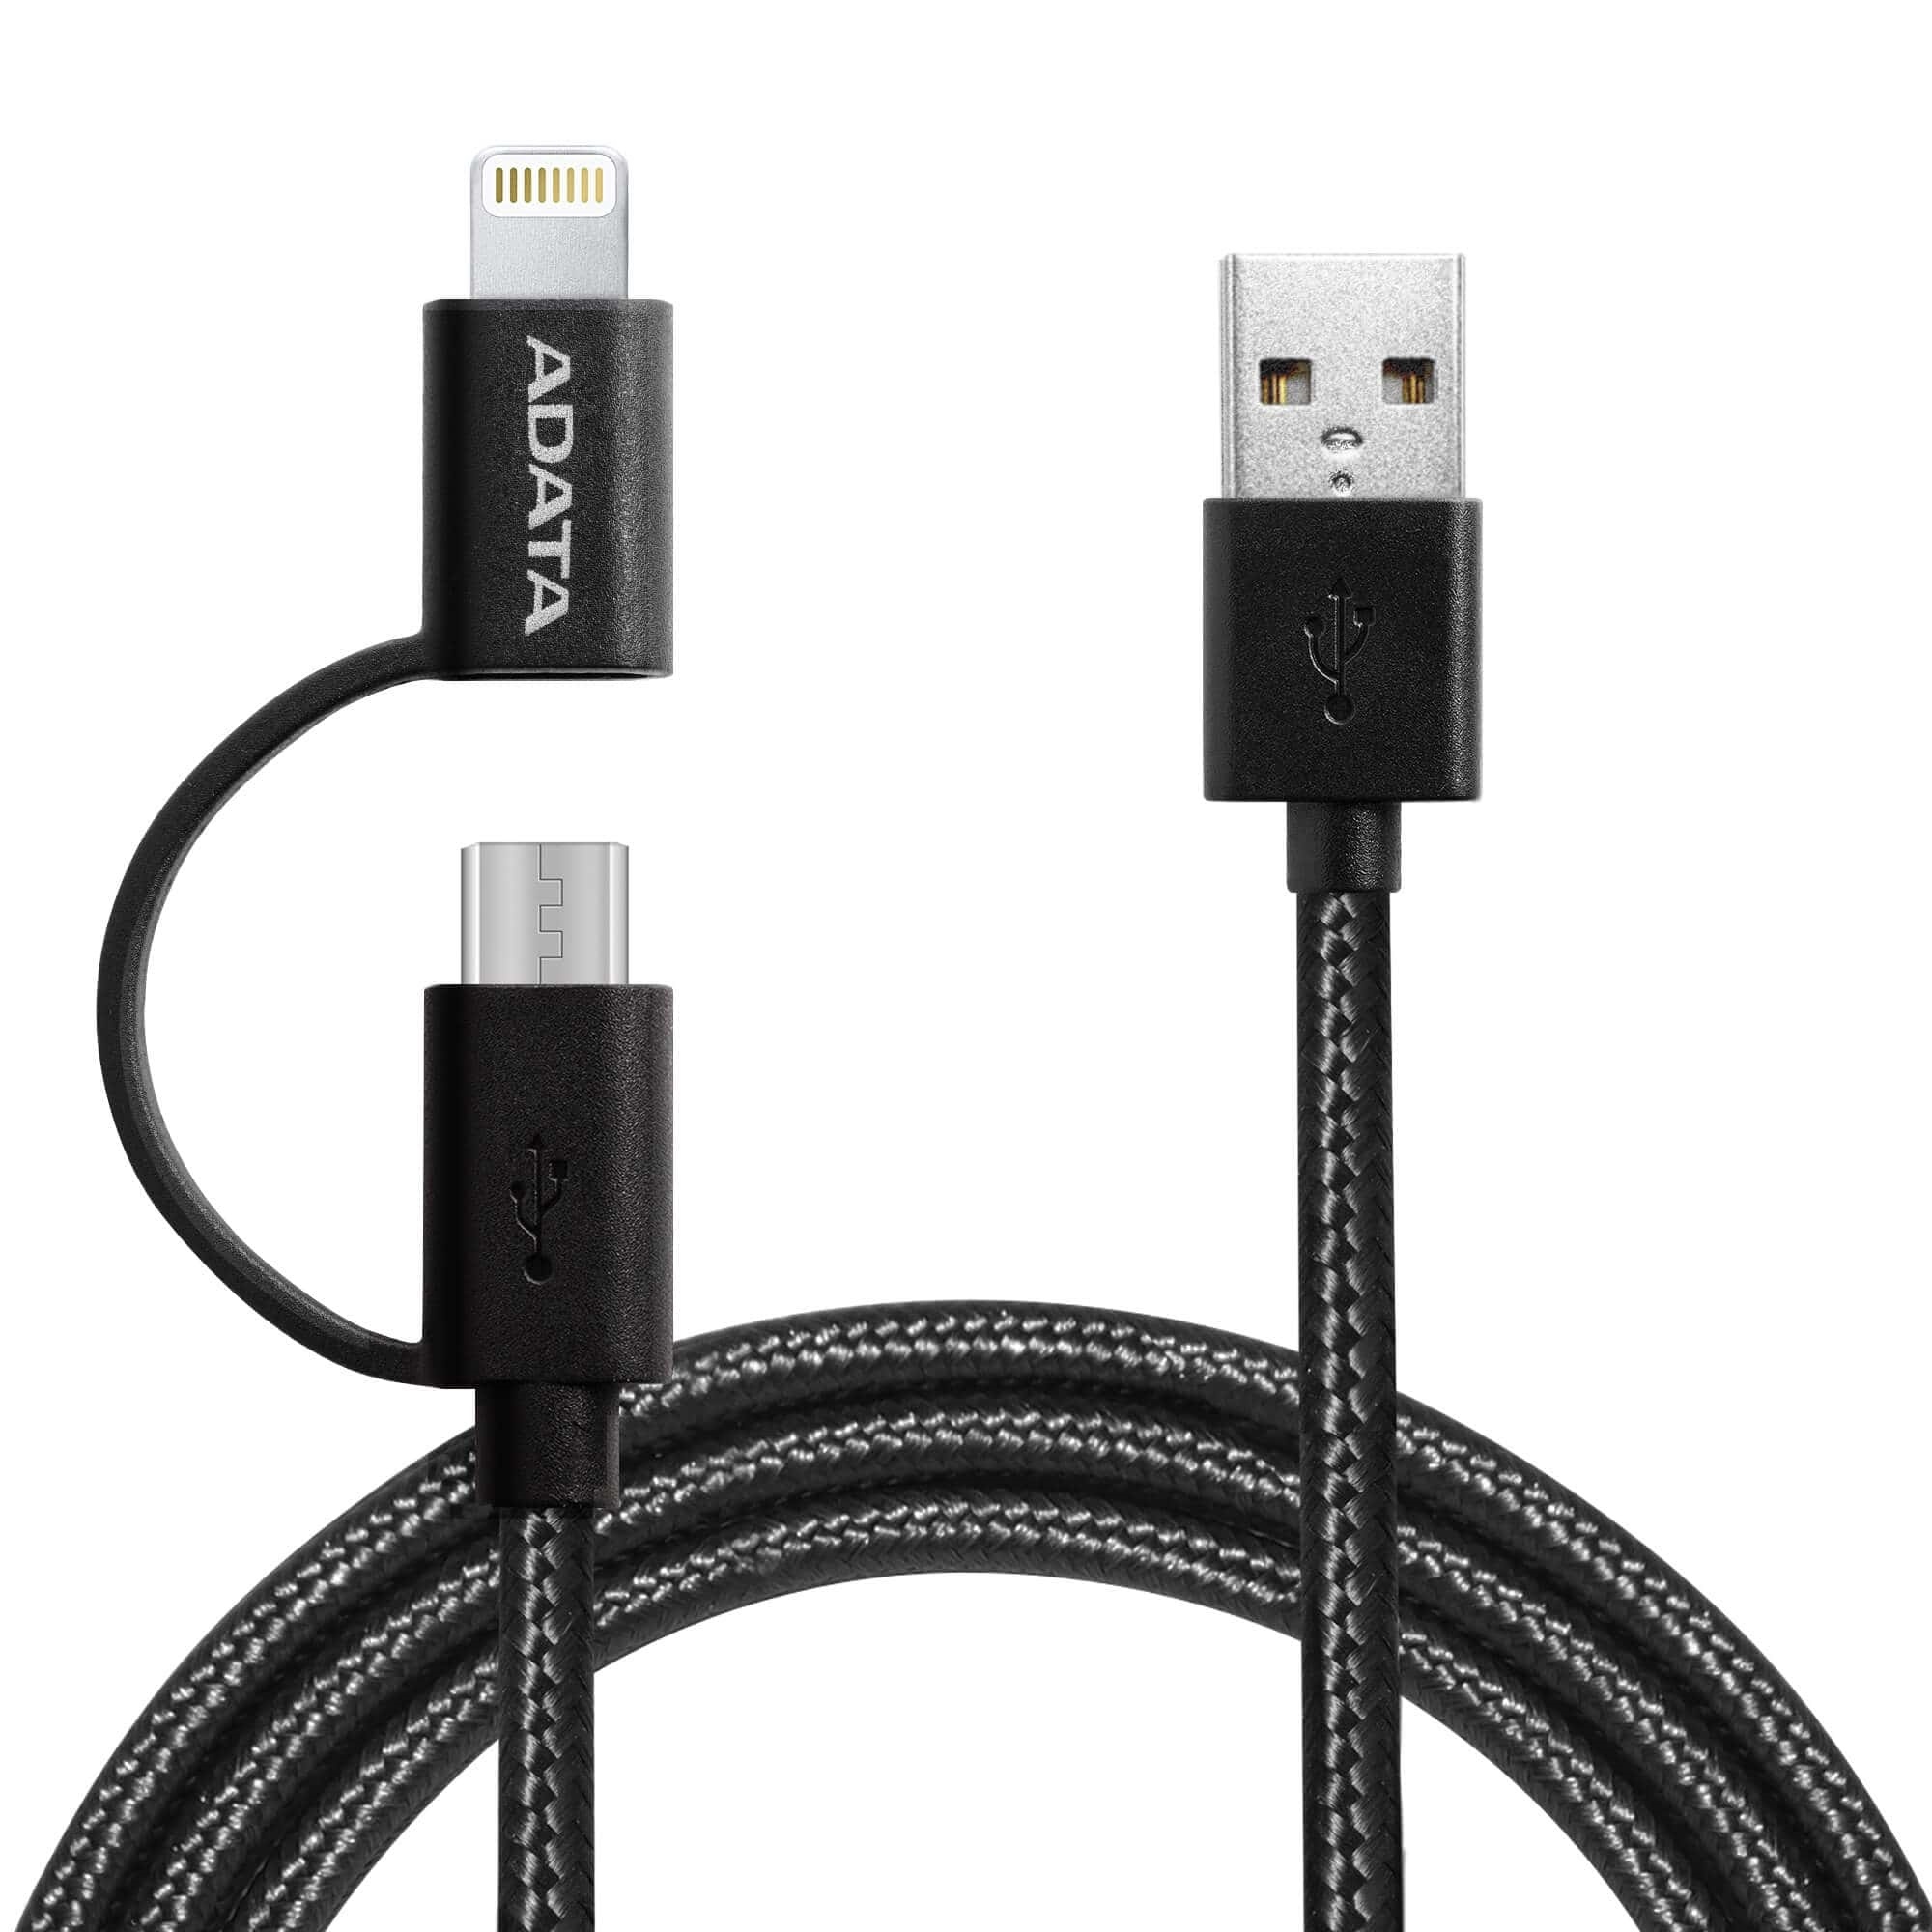 ADATA 2-in-1 Lightning/Micro USB to USB Cable - Black (2m)